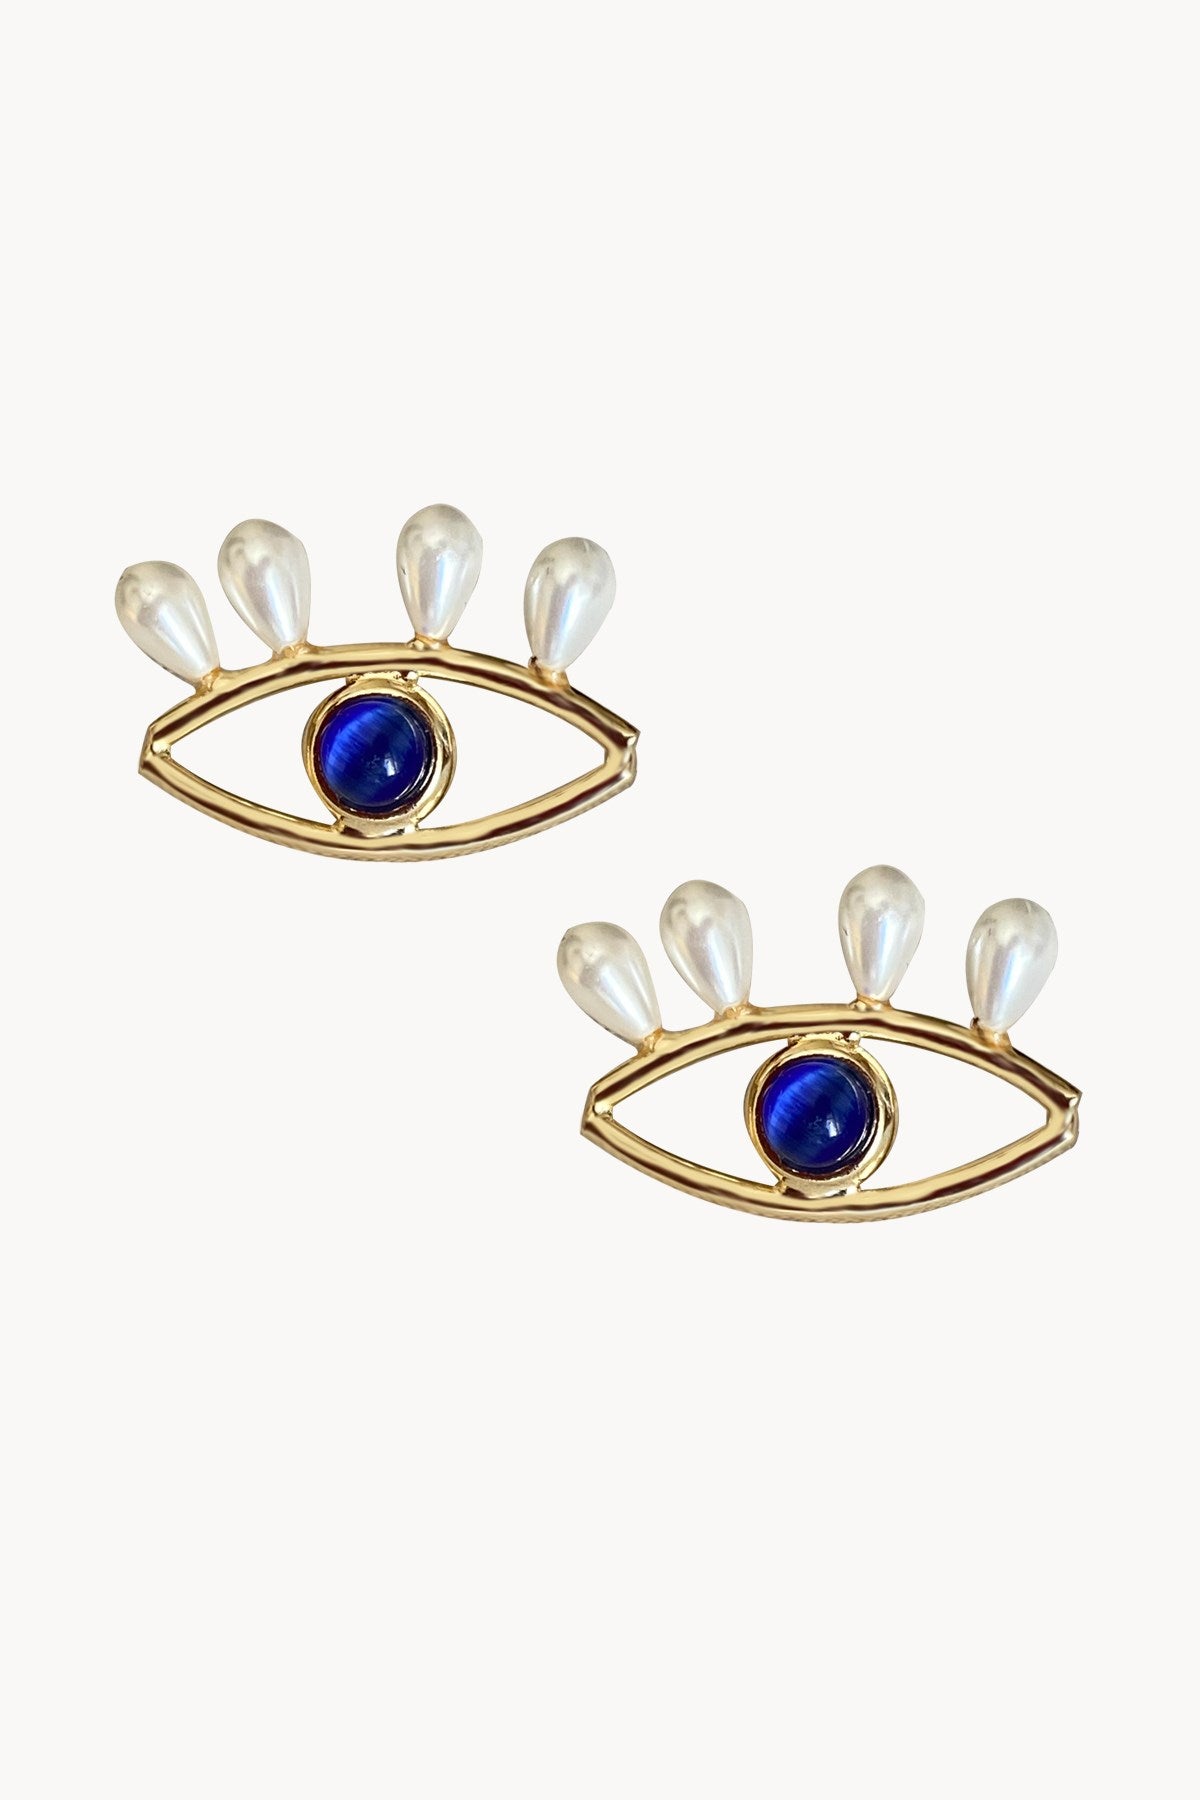 Blue Eye Natural Pearl Earrings Gold Plated